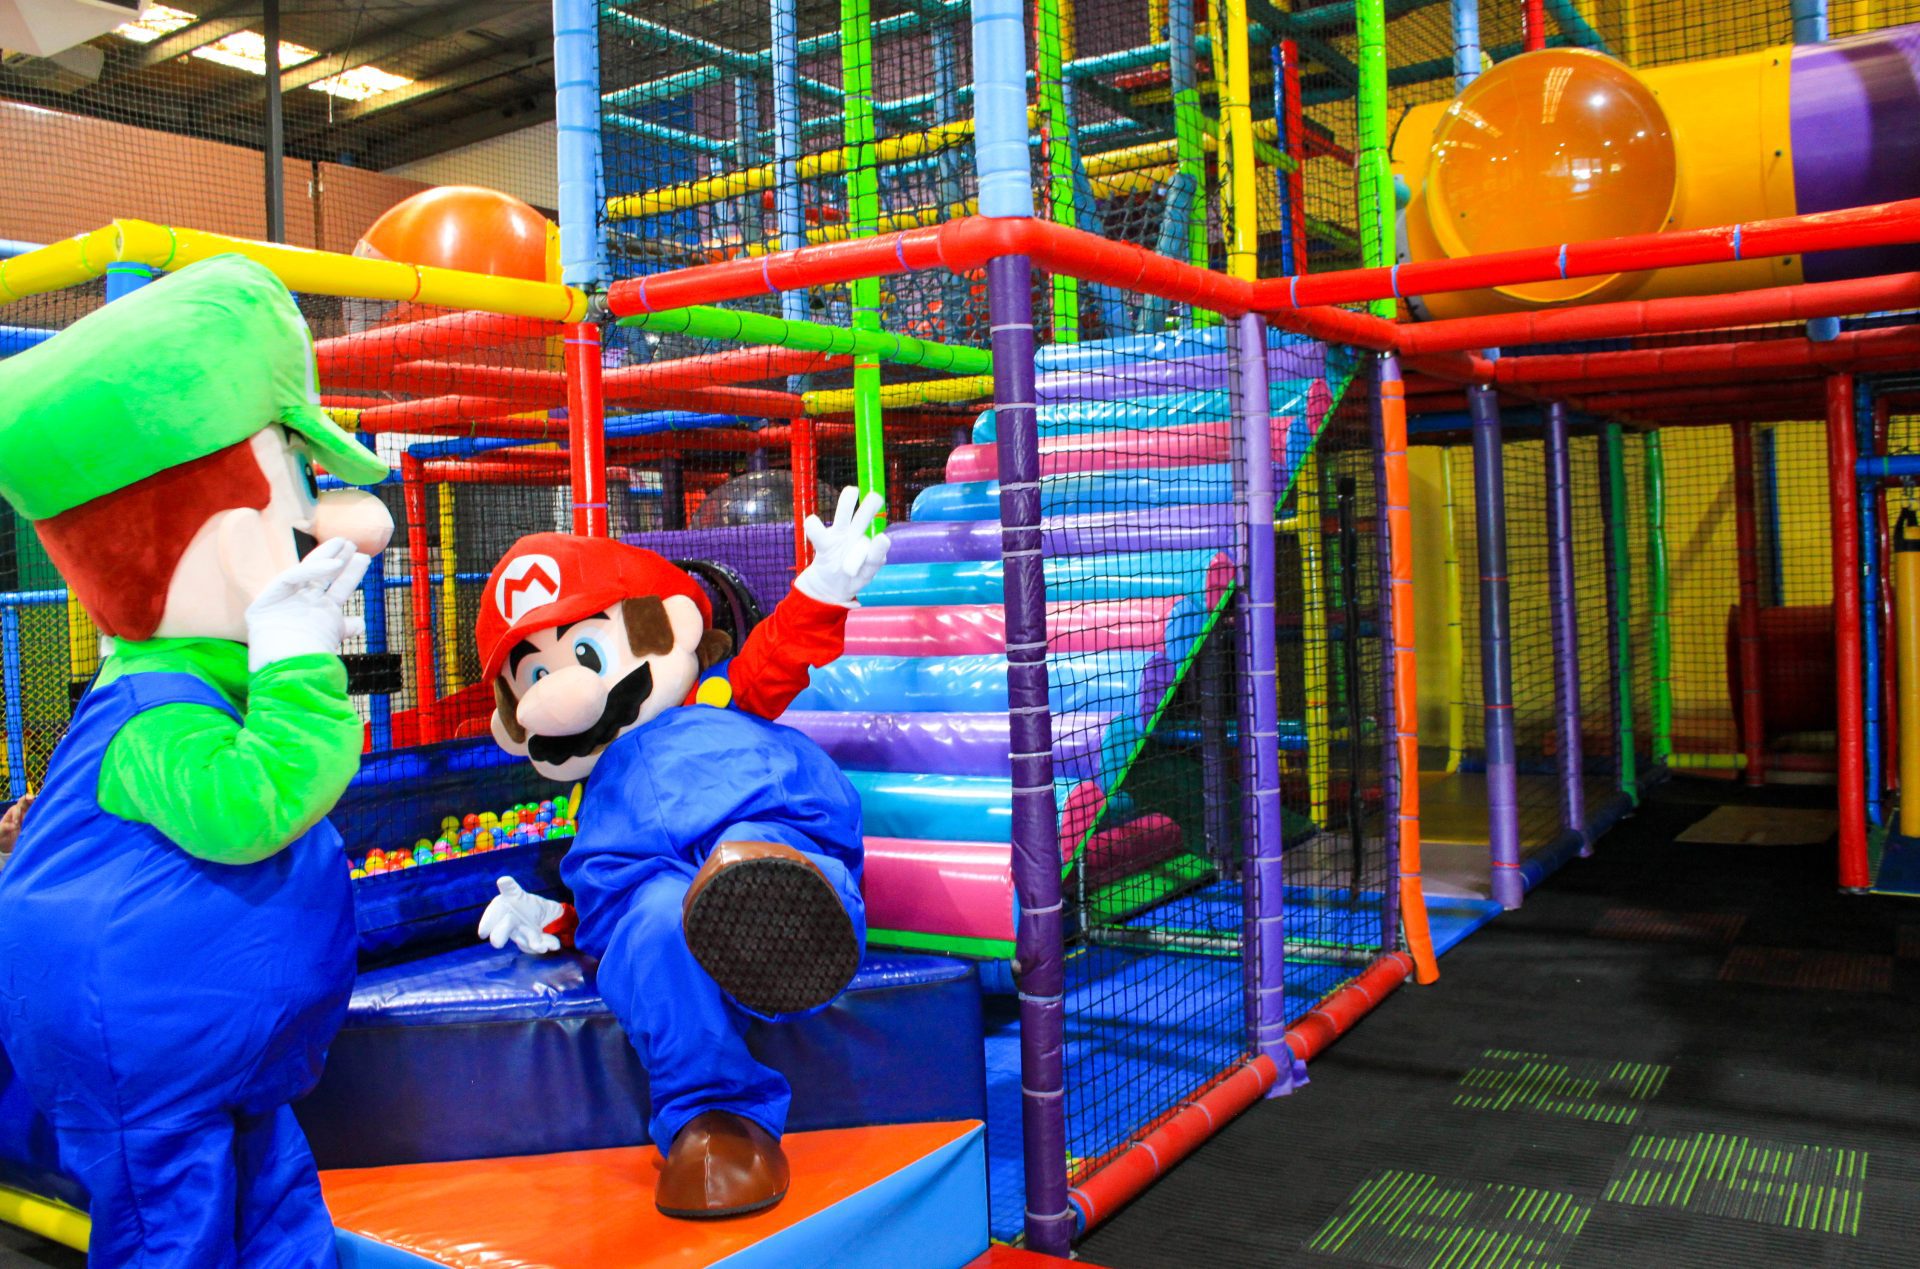 Two Mario Bros having fun in a play area, sliding down a colorful slide